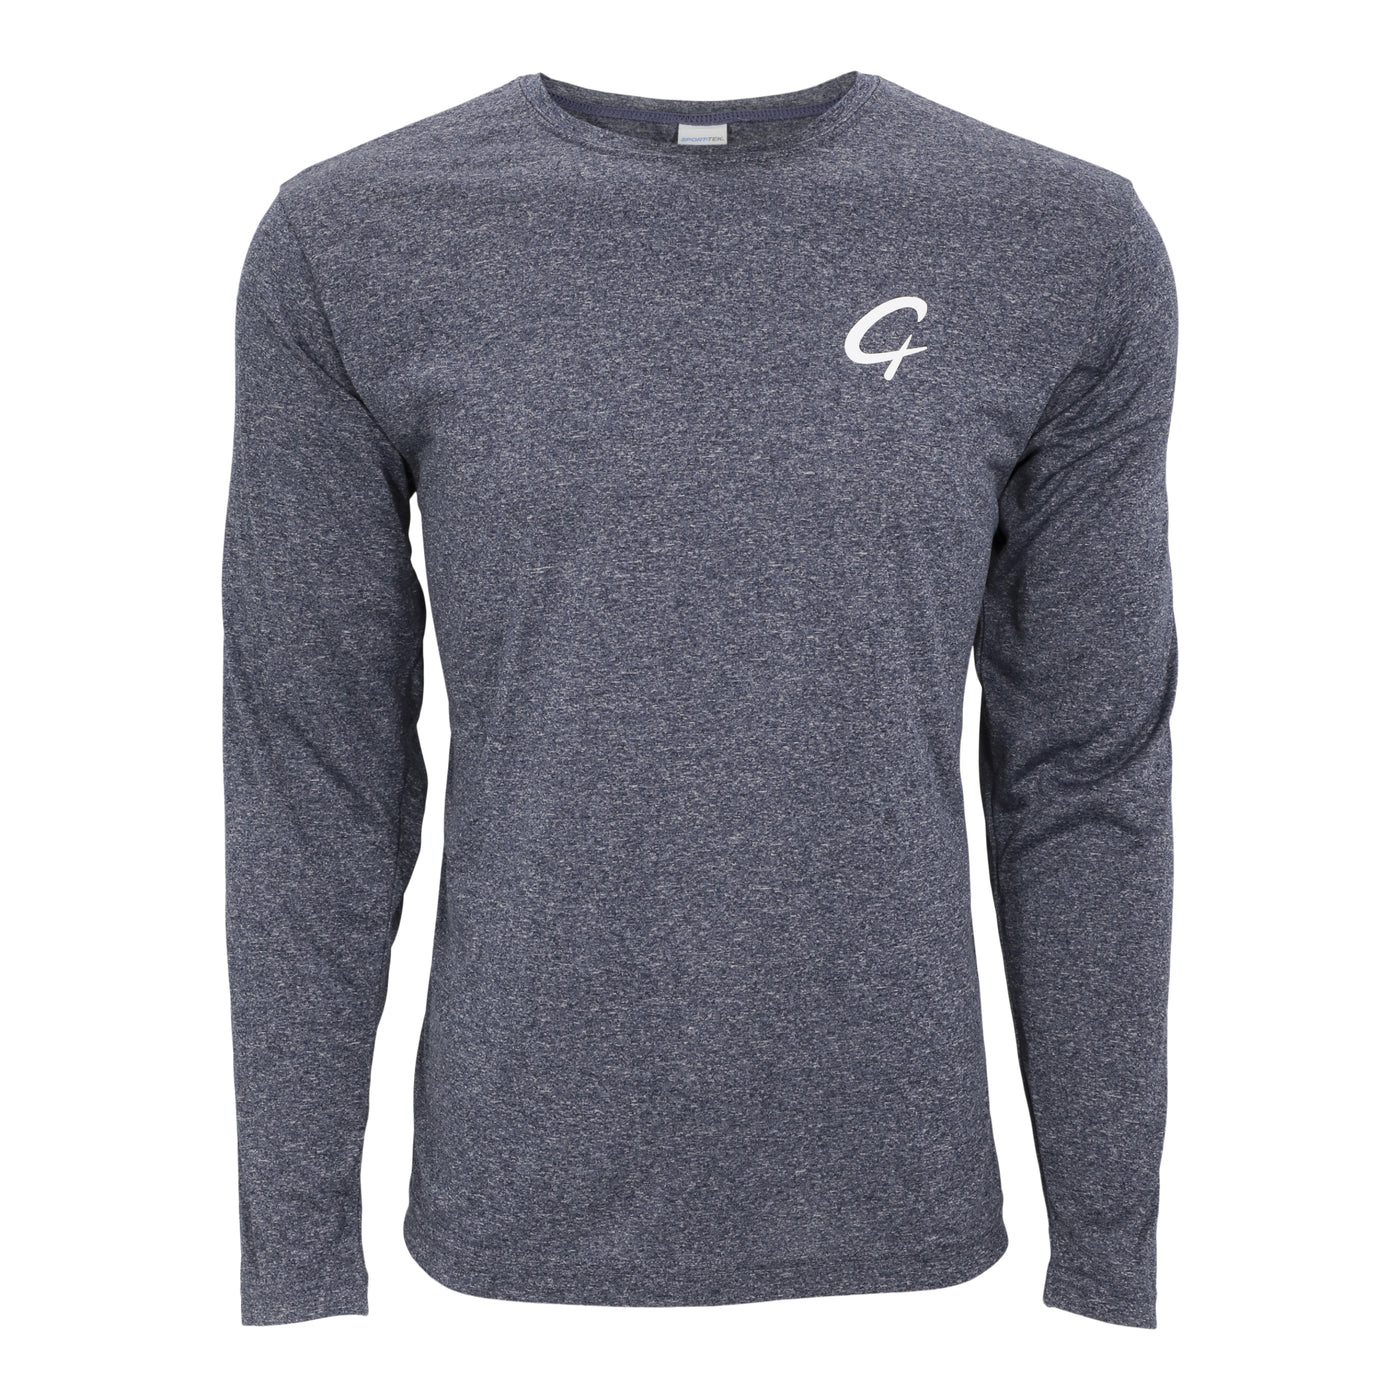 Created Performance navy long sleeve front view